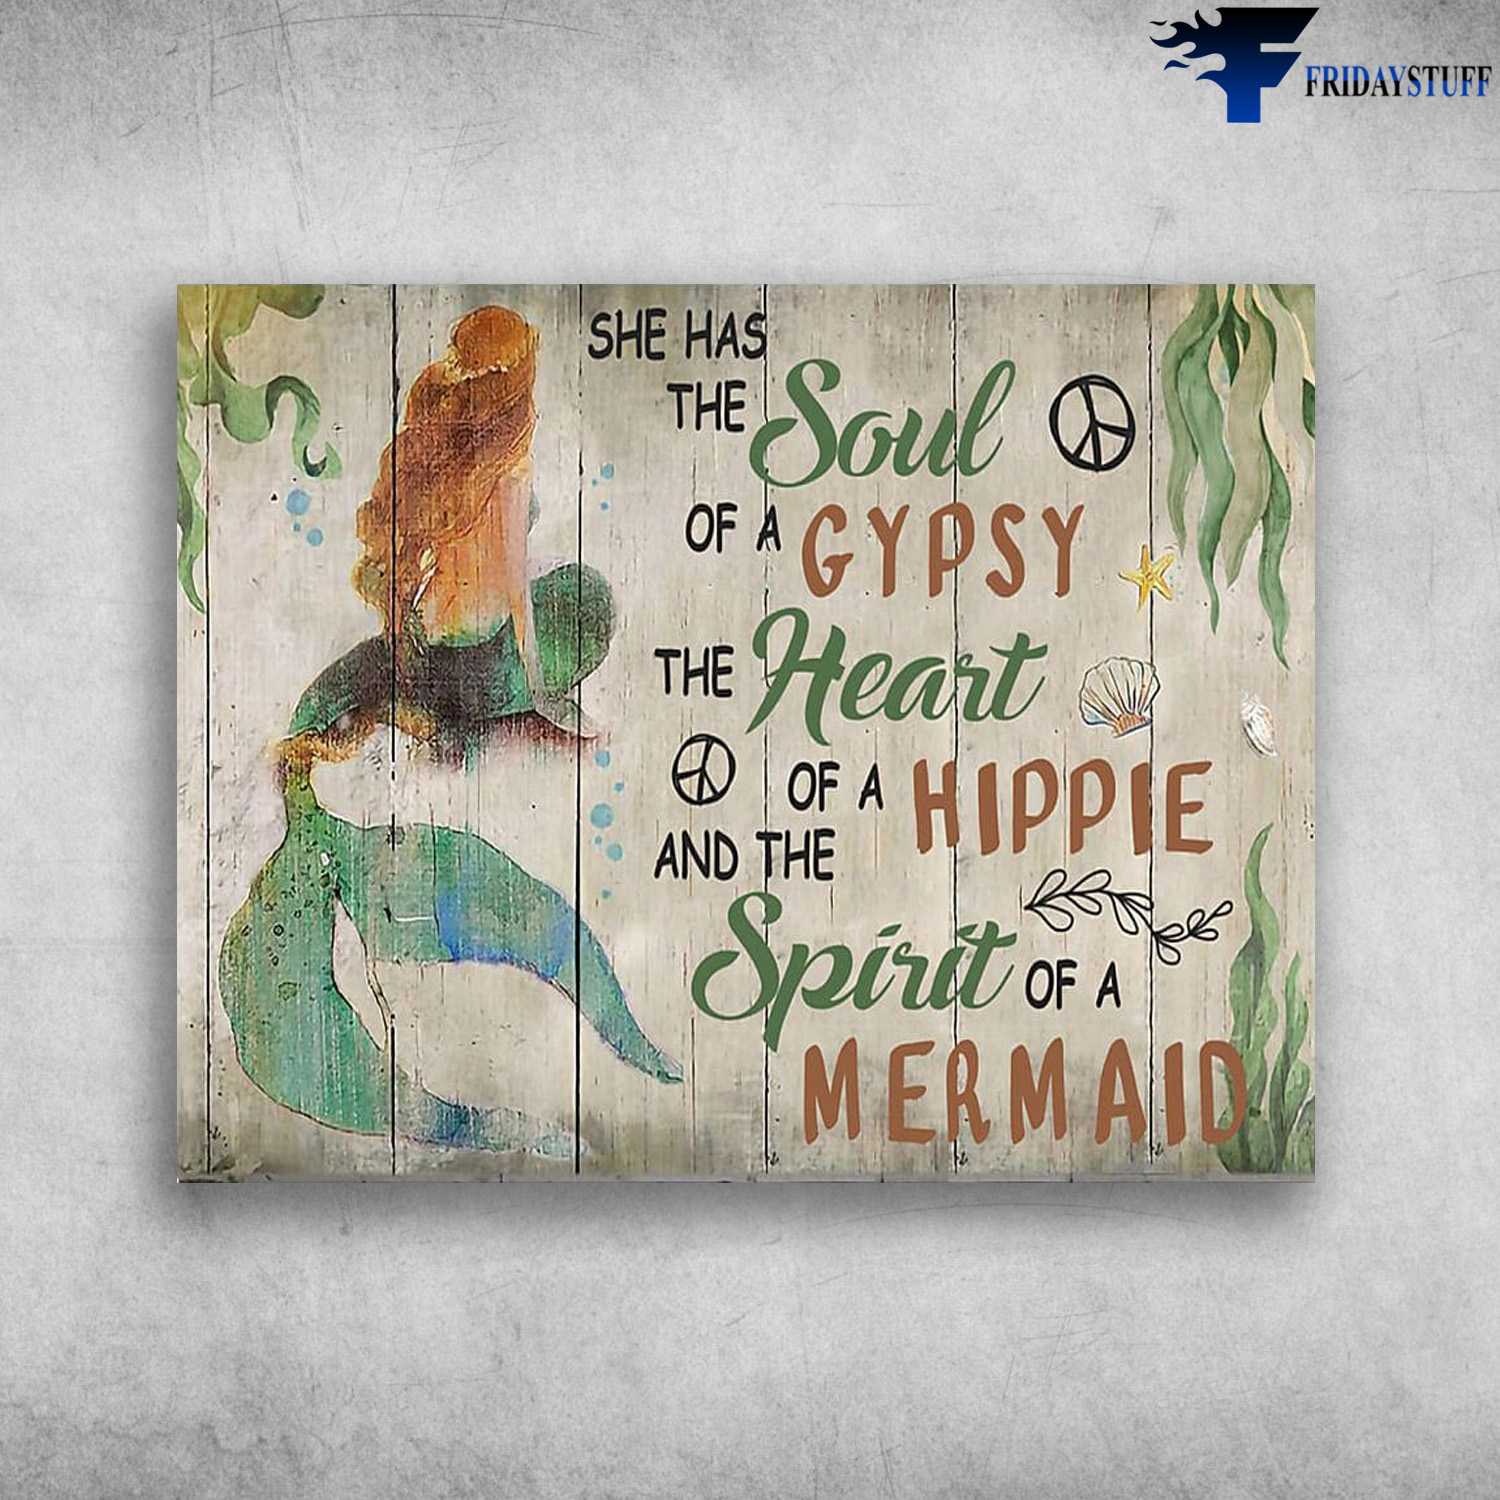 Mermaid Poster, Mermaid Decor, She Has The Soul Of A Gypsy, The Heart Of A Hippie, Spirit Of A Mermaid